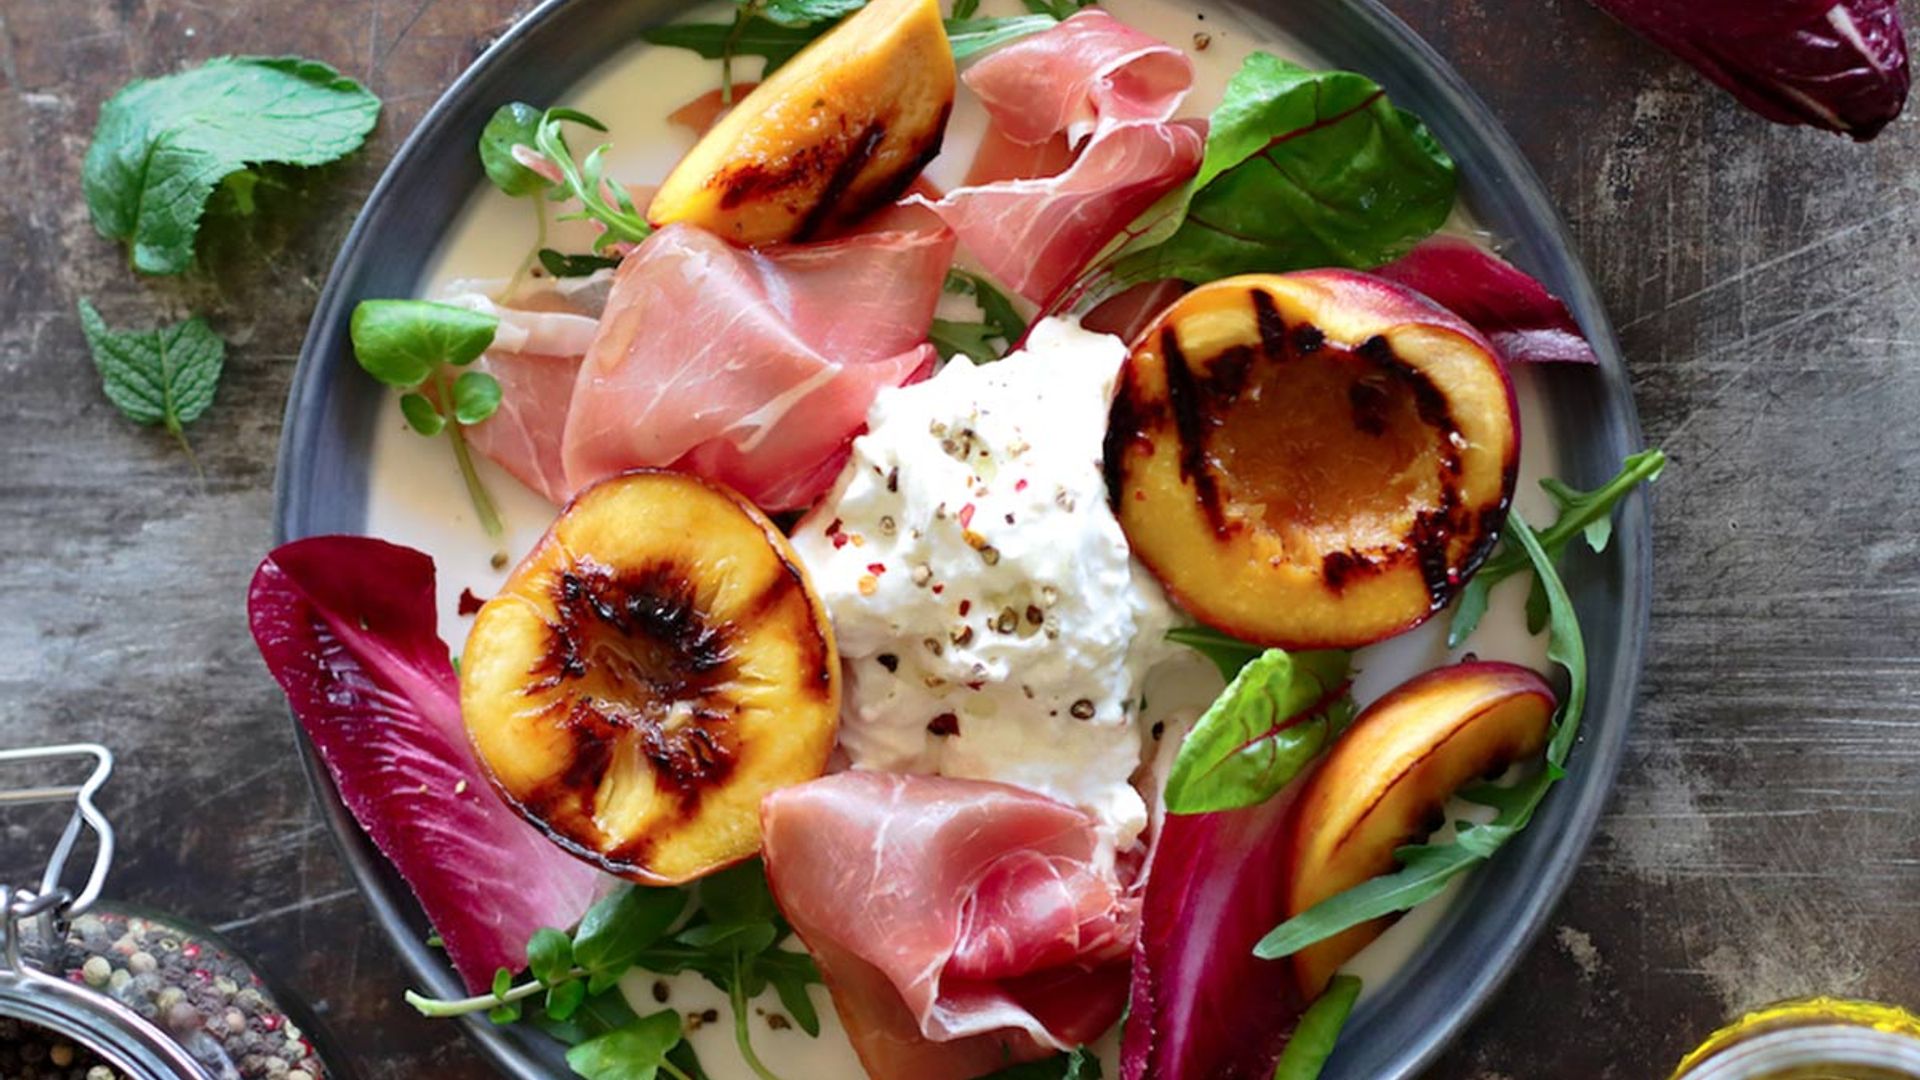 This burrata salad recipe is perfect for sunny weekend barbecues